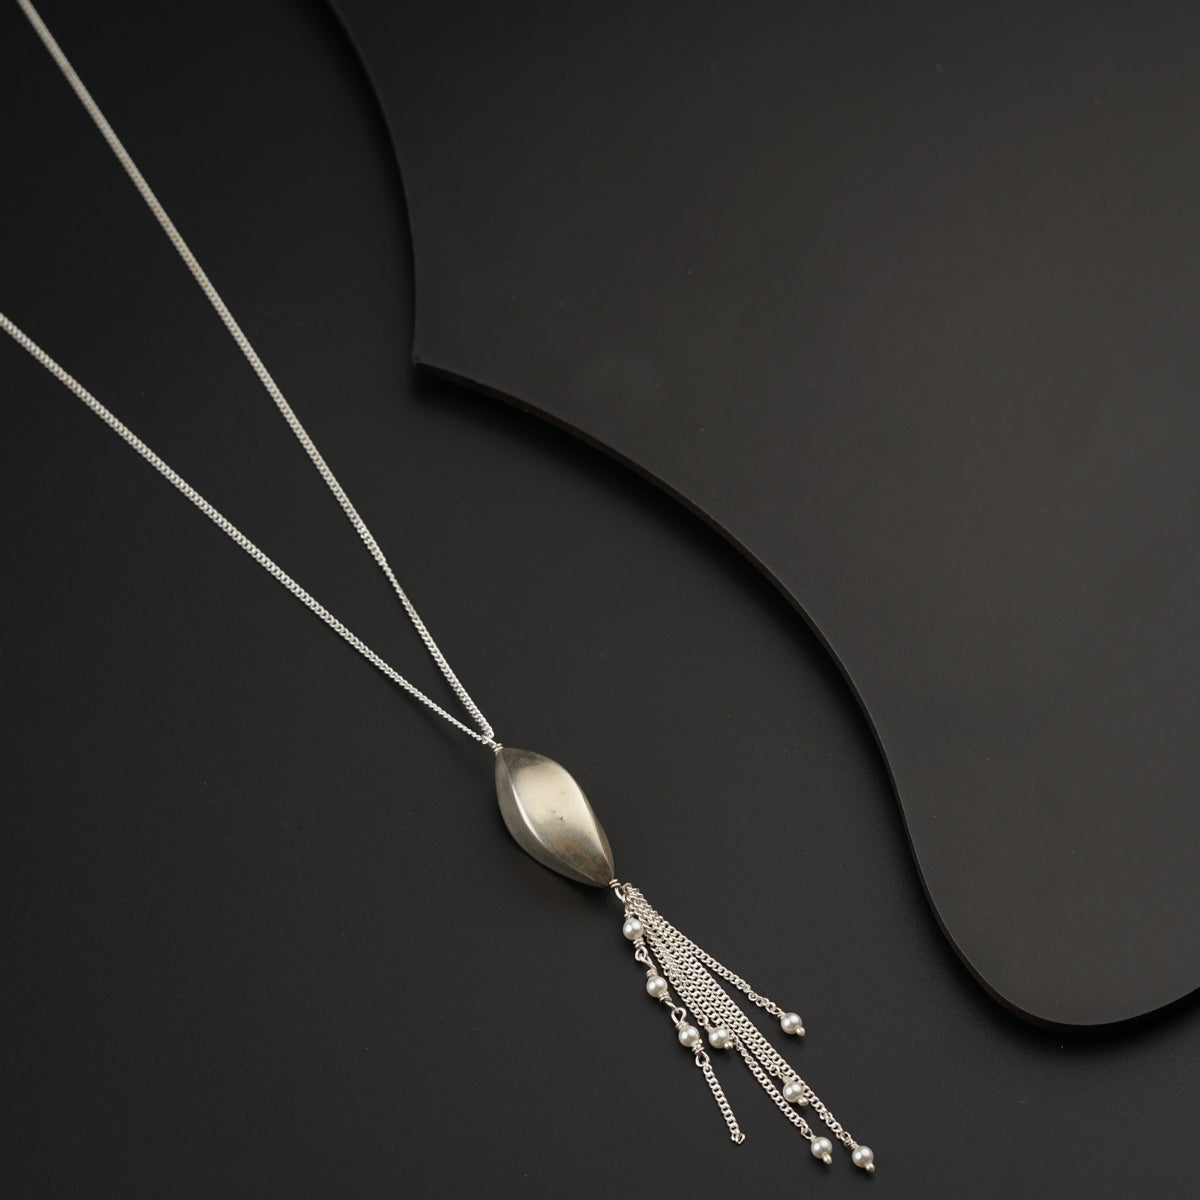 a silver necklace with a long tassel hanging from it